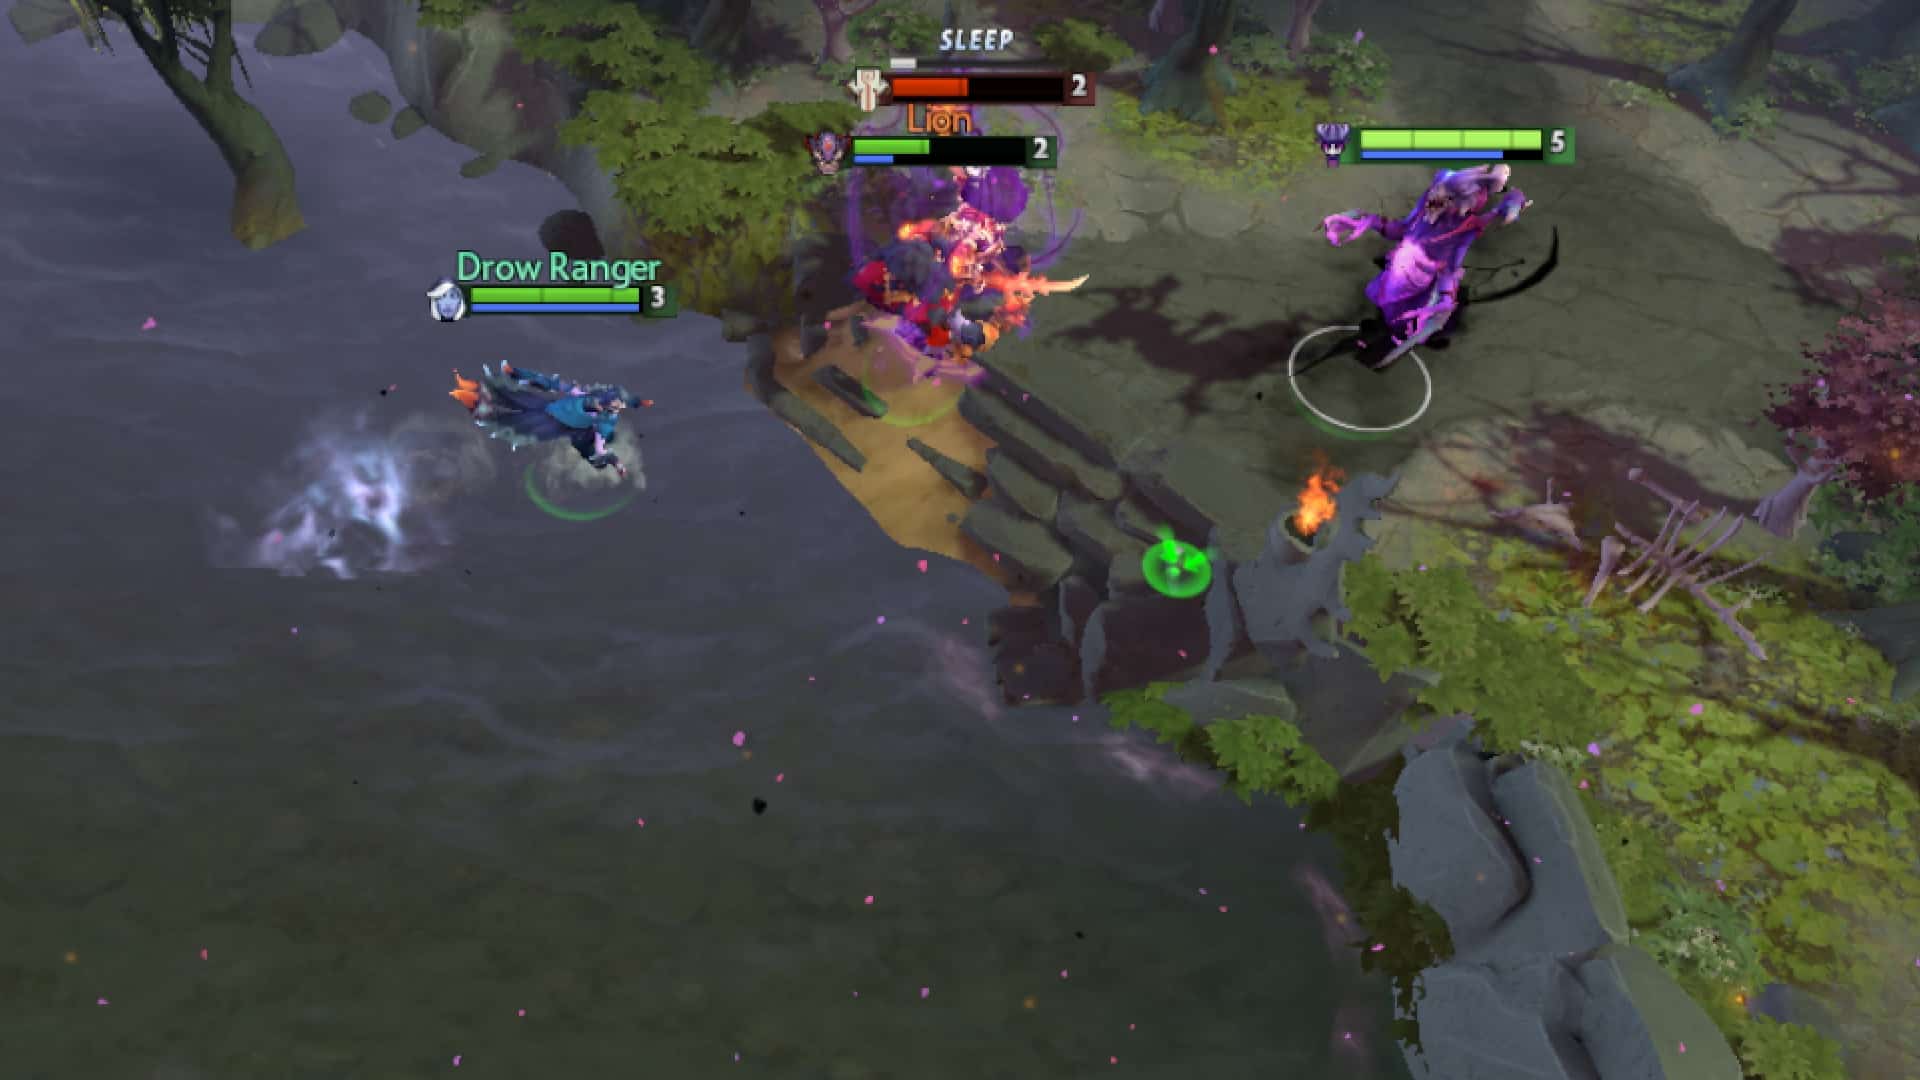 Bane uses Nightmare to disable enemies